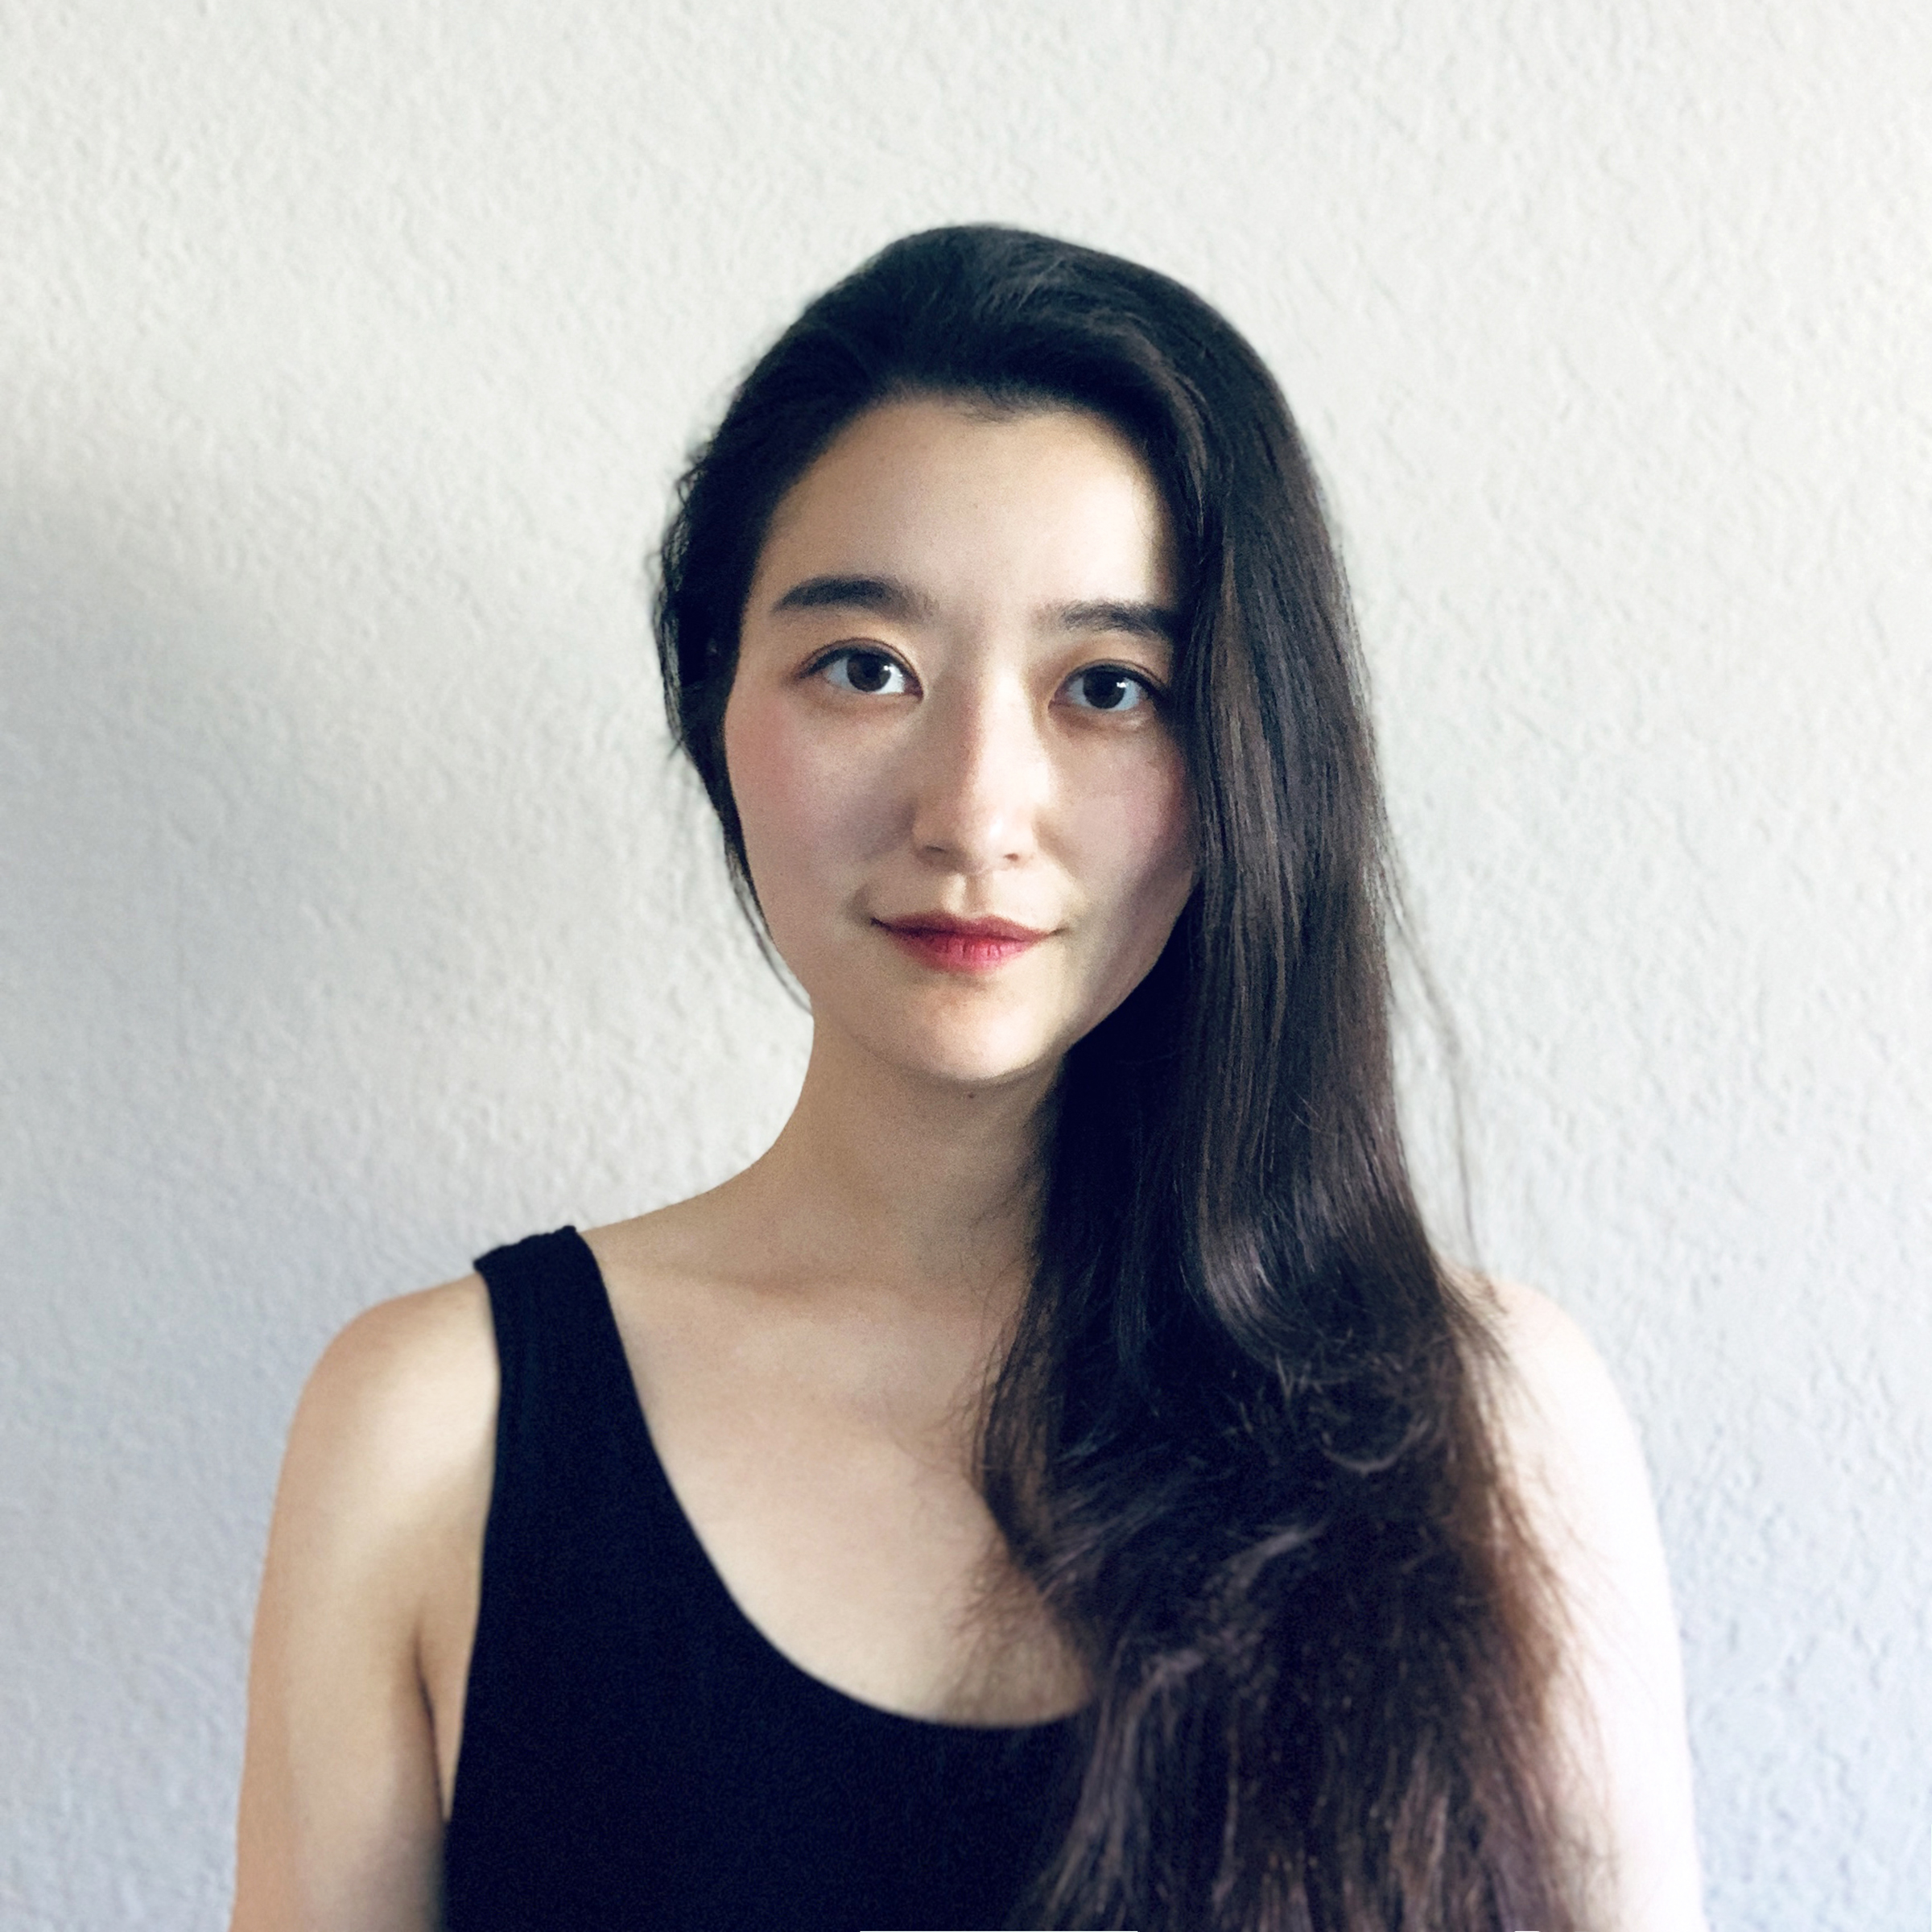 Xi Alice Zong joined the C2A jury board